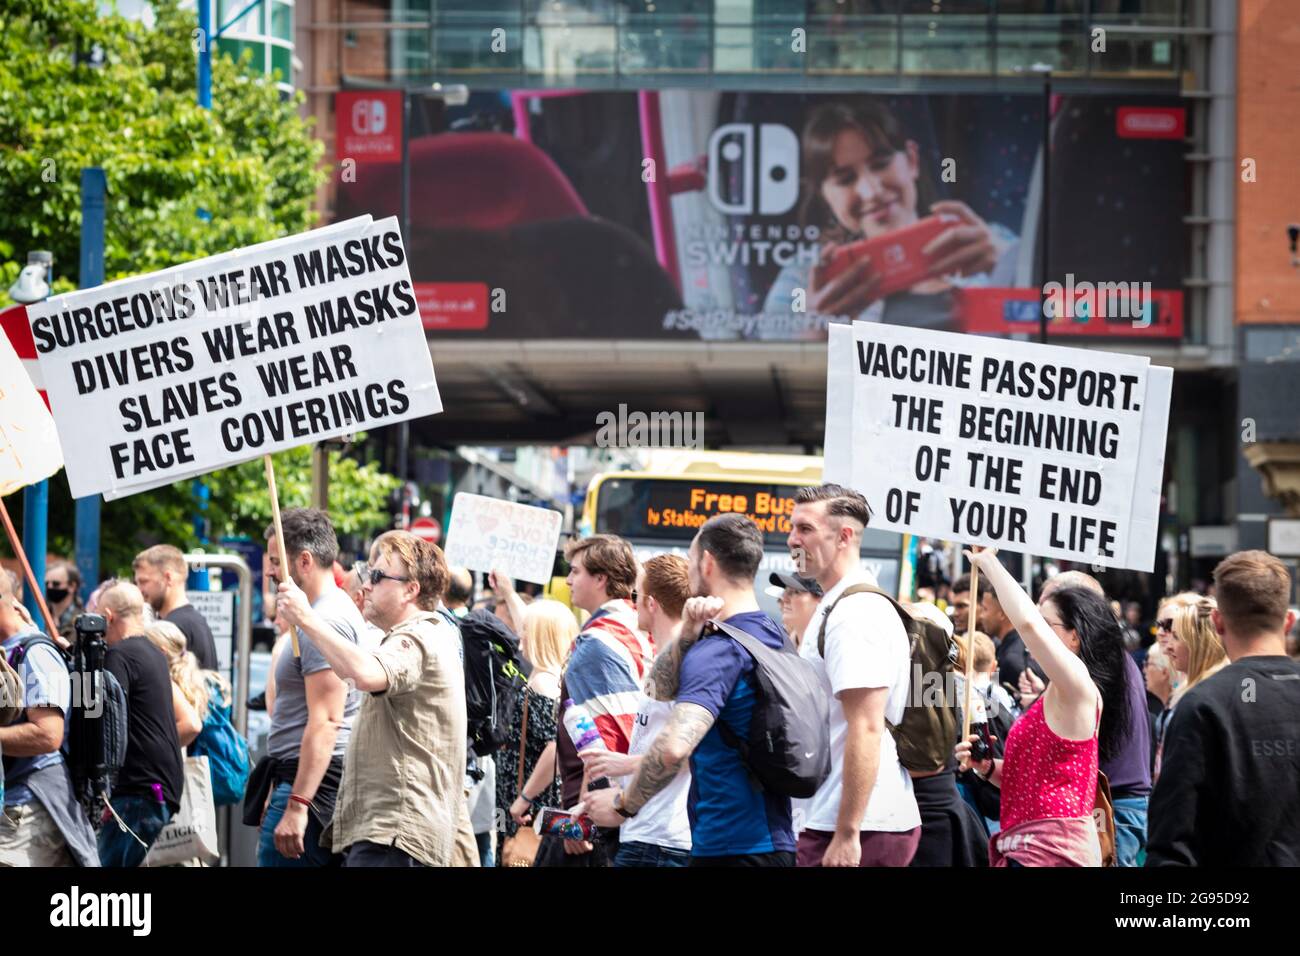 Manchester, UK. 24th July, 2021. Hundreds of protesters with anti COVID19 vaccination placards descend on the city. People march through Piccadilly for a global Worldwide Rally For Freedom demonstration. Credit: Andy Barton/Alamy Live News Stock Photo